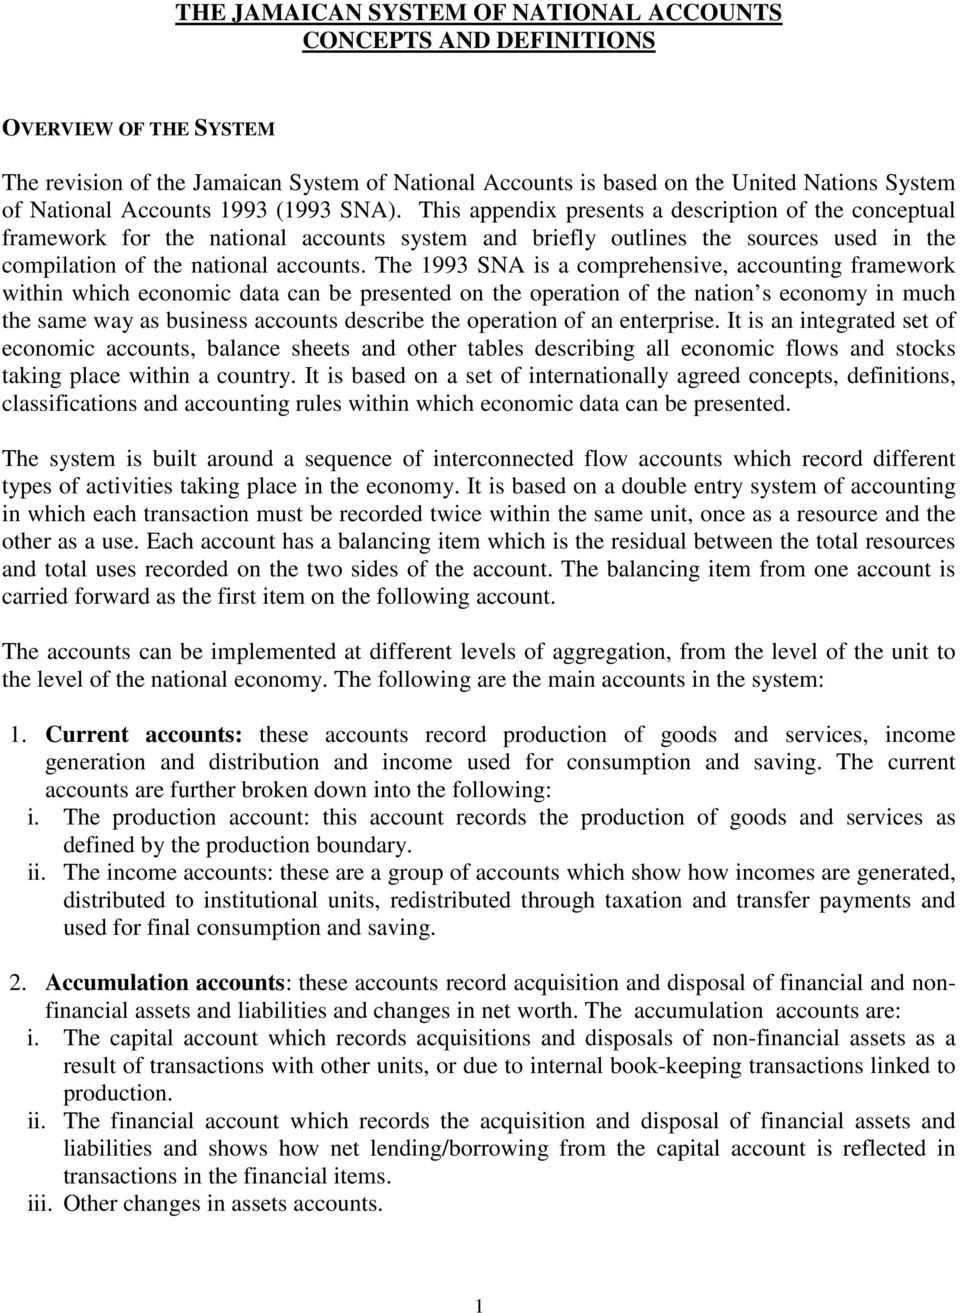 This appendix presents a description of the conceptual framework for the national accounts system and briefly outlines the sources used in the compilation of the national accounts.